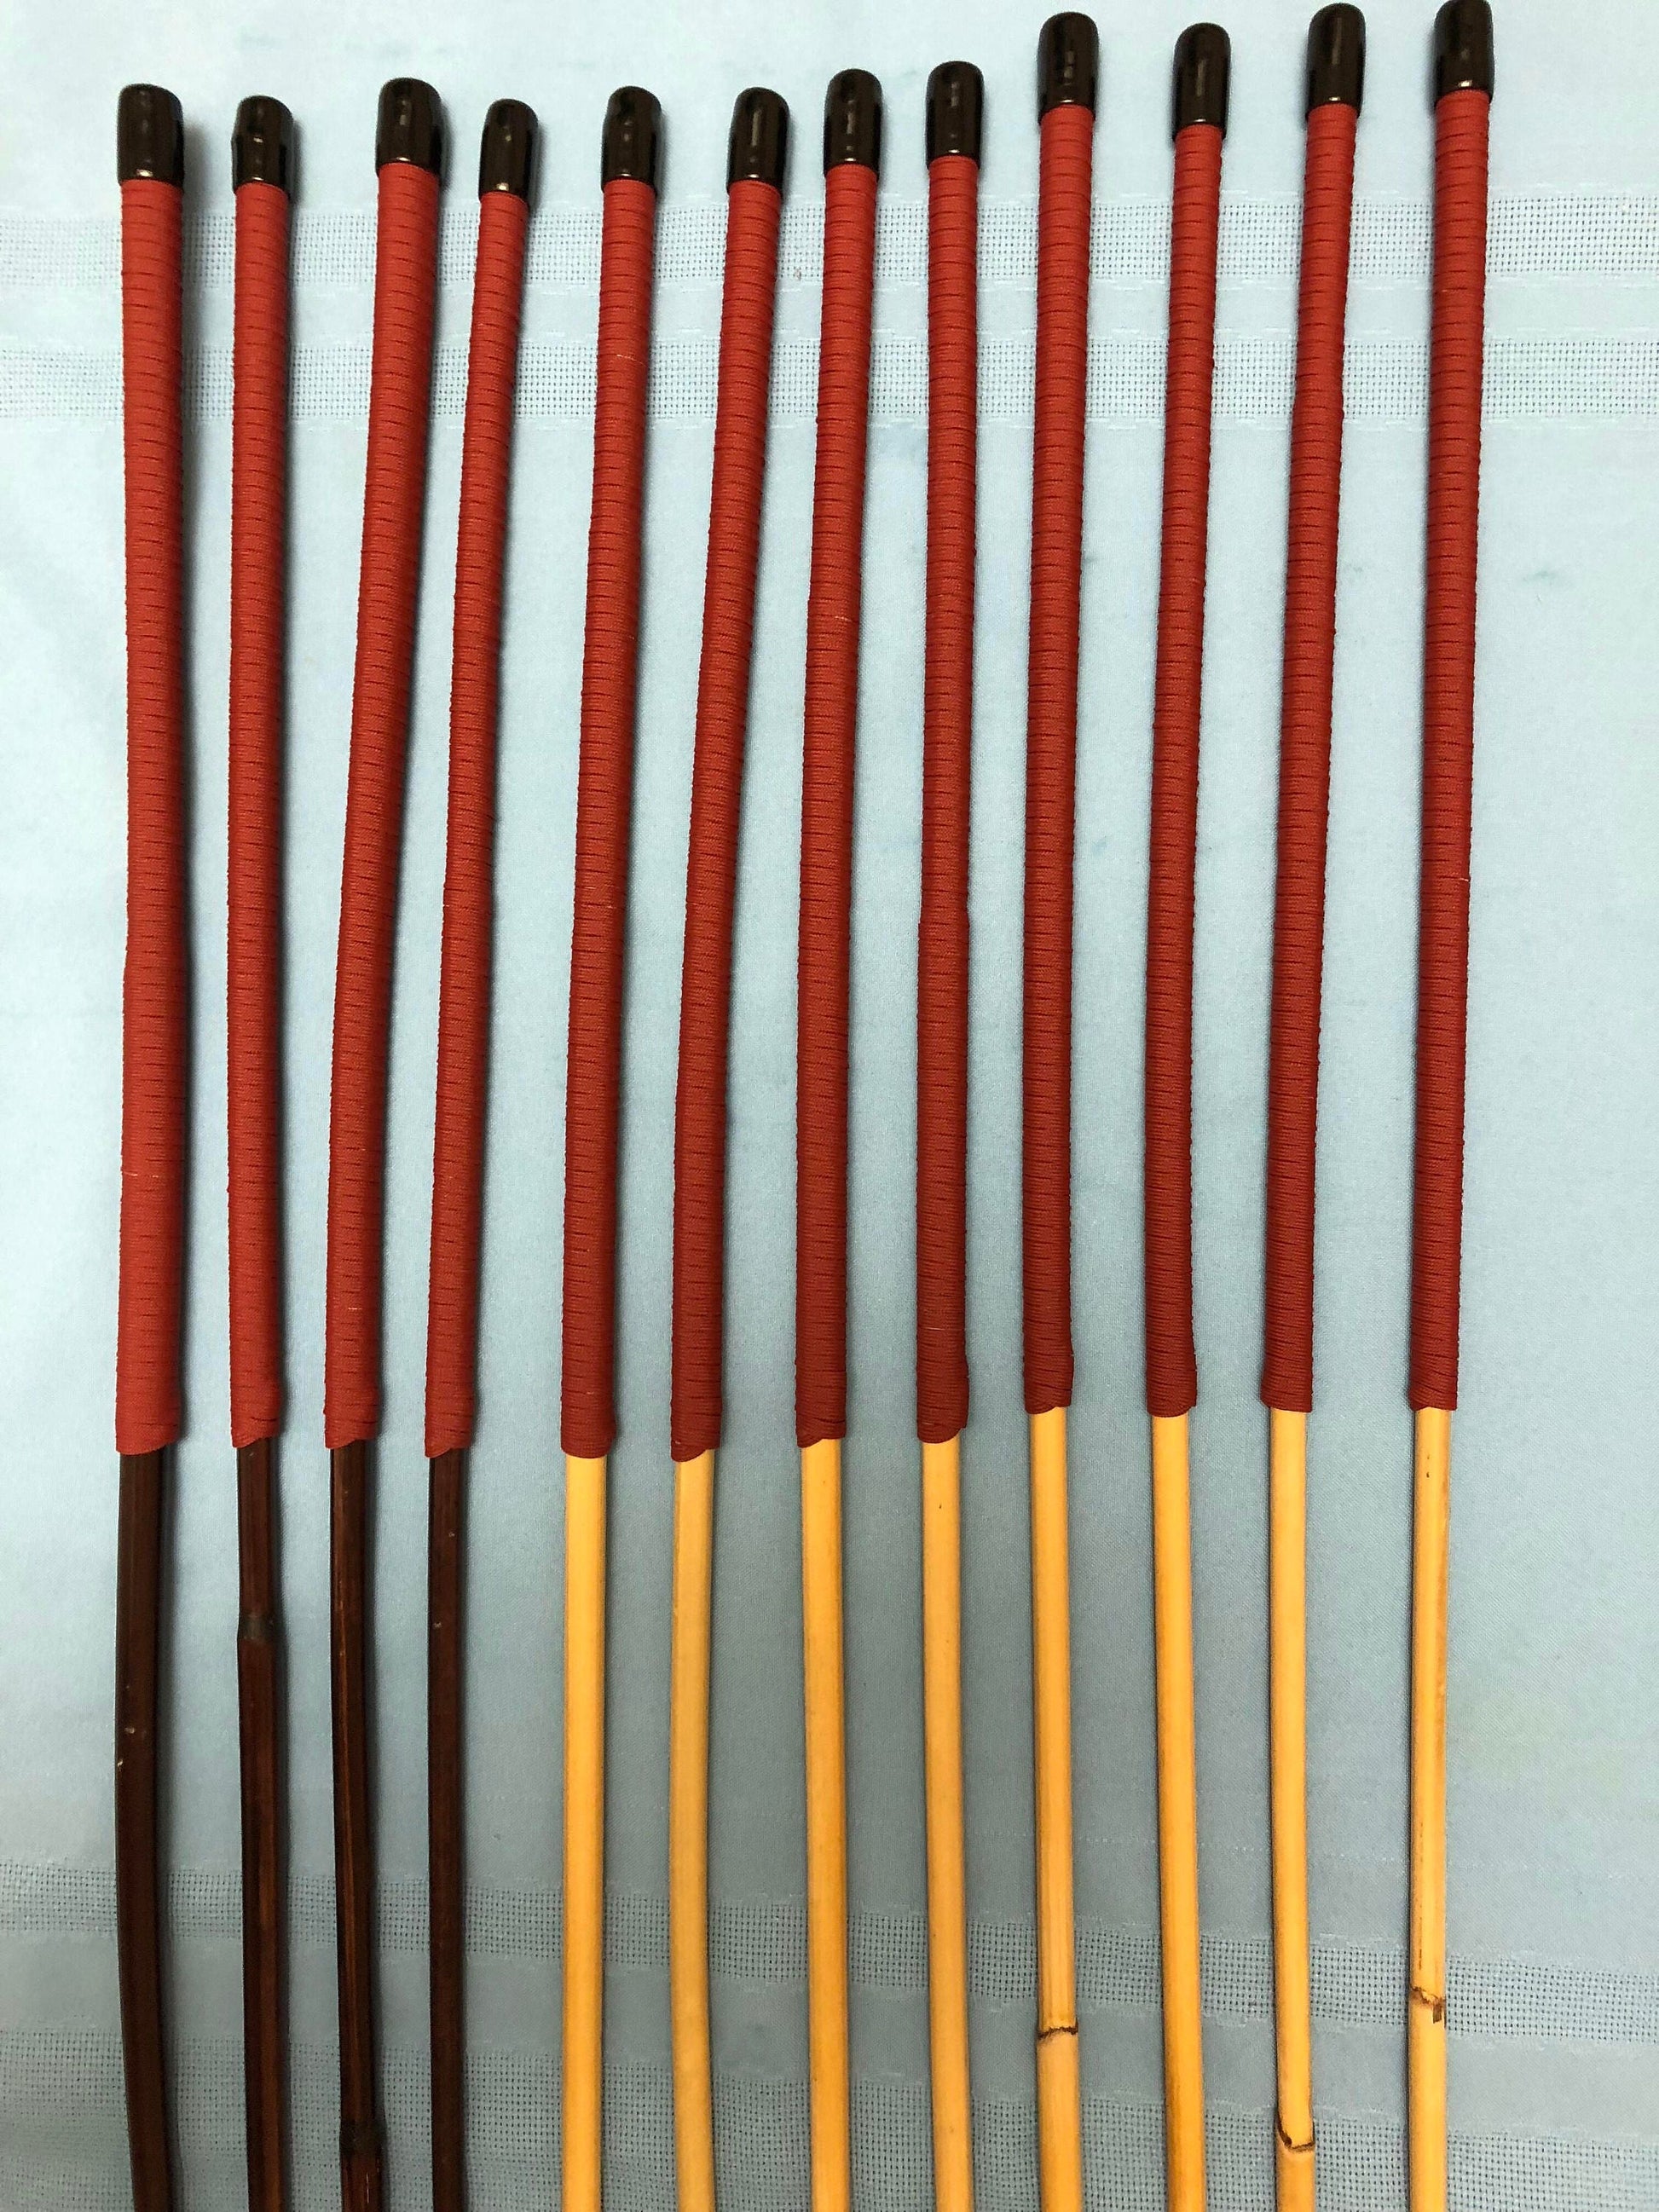 Set of 12 Whippy Smoked Dragon Canes / Classic Dragon Canes / Thin Stingy Canes / Falaka Canes -  Red Paracord Handles